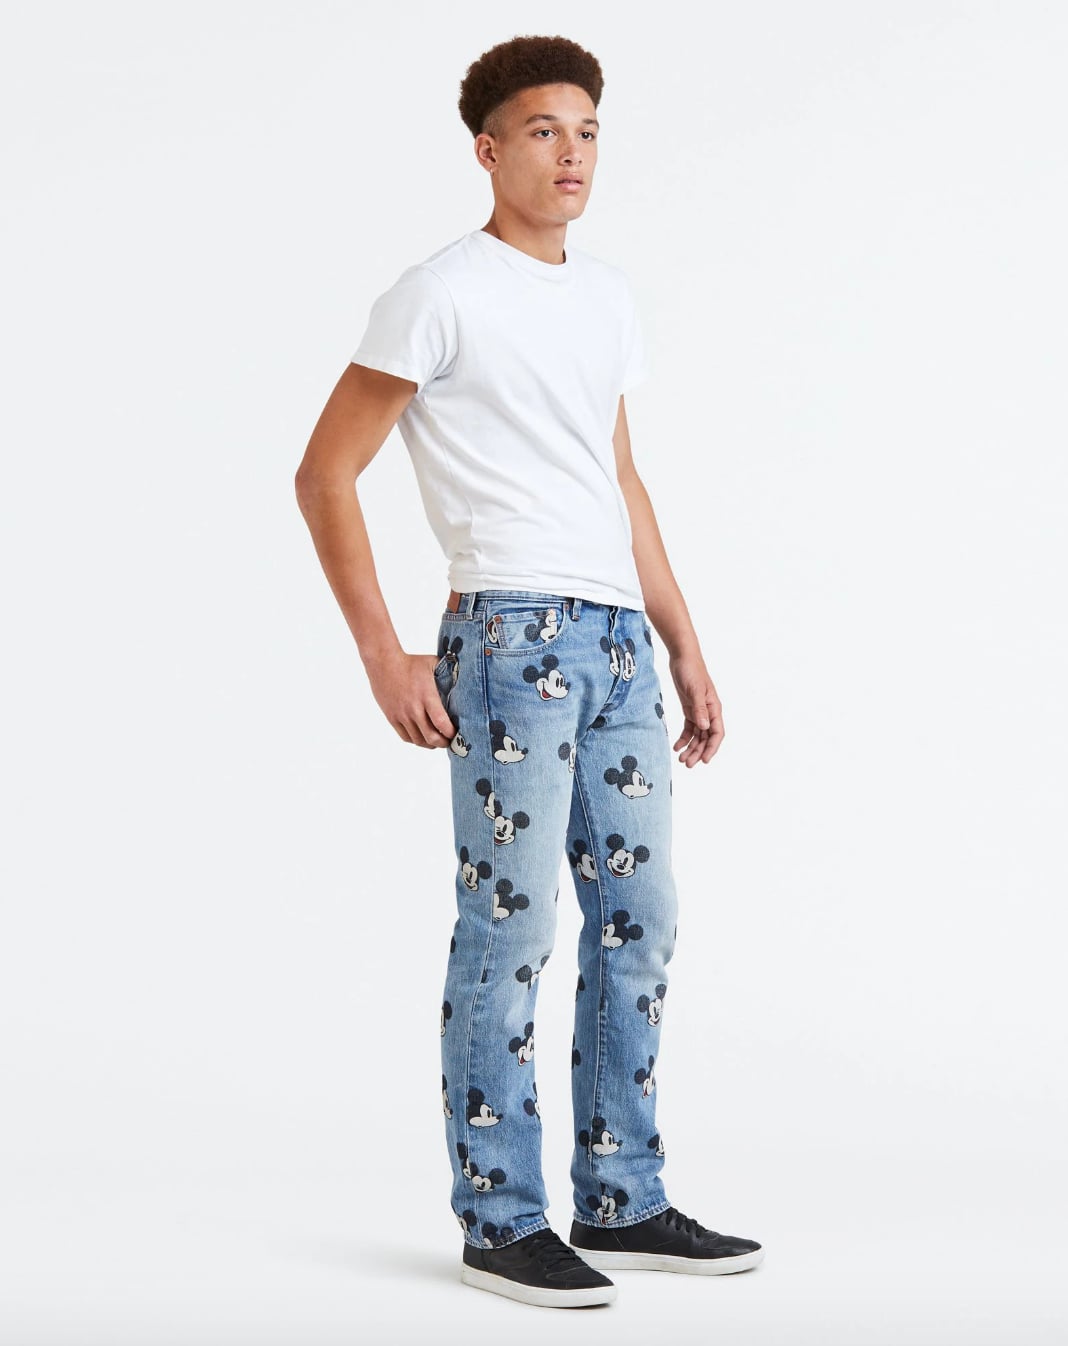 mickey mouse levis jeans